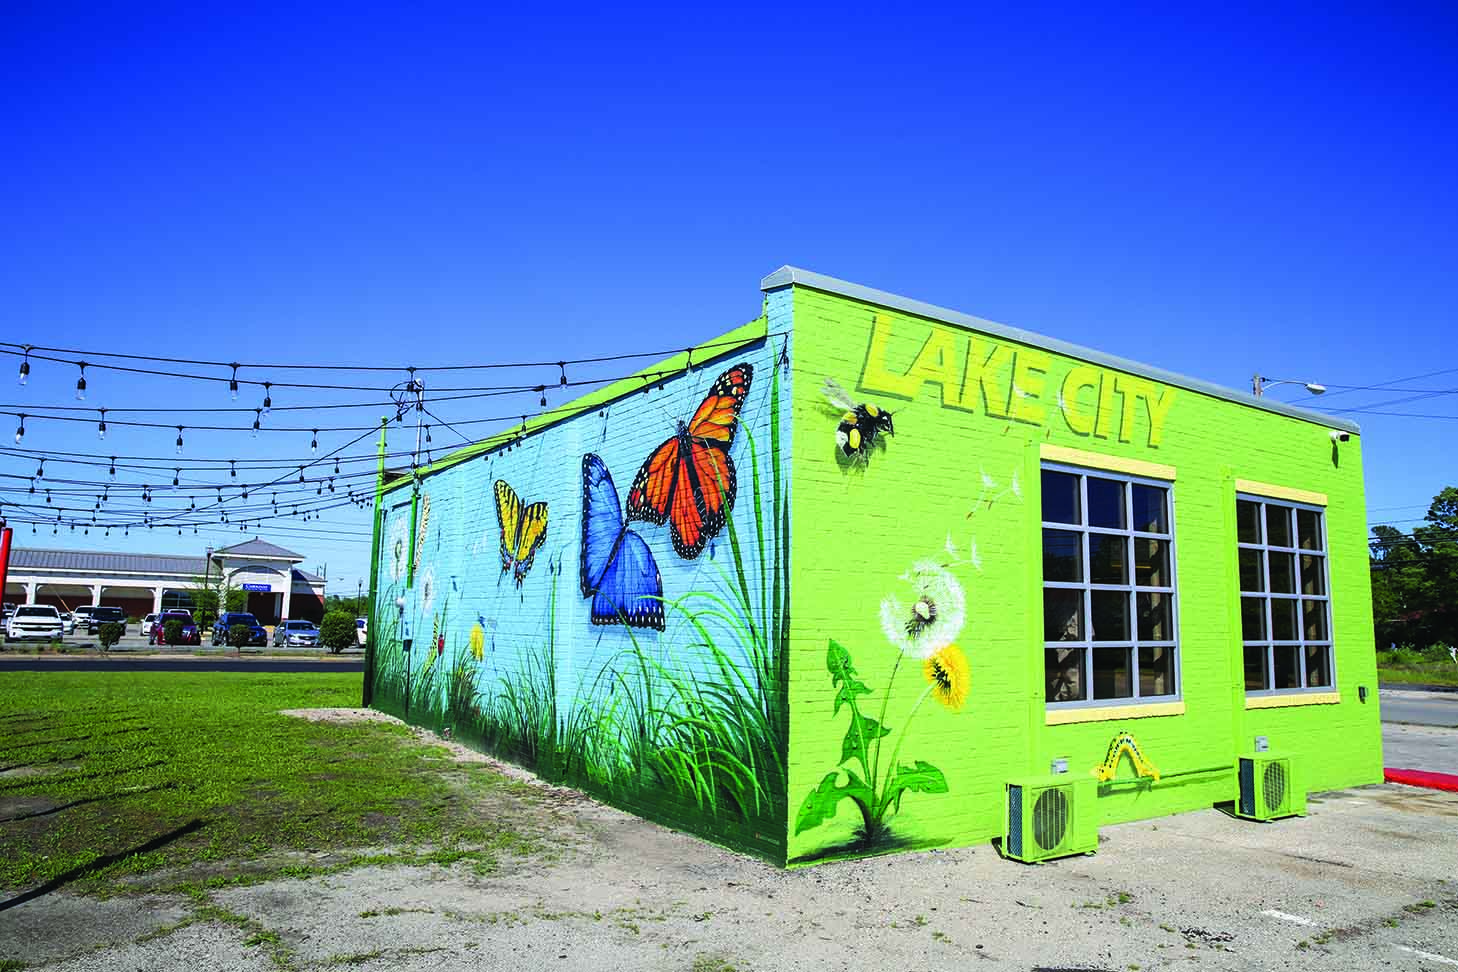  Donald Walker completed the "Transformation" mural in Lake City during the 2019 Artfields